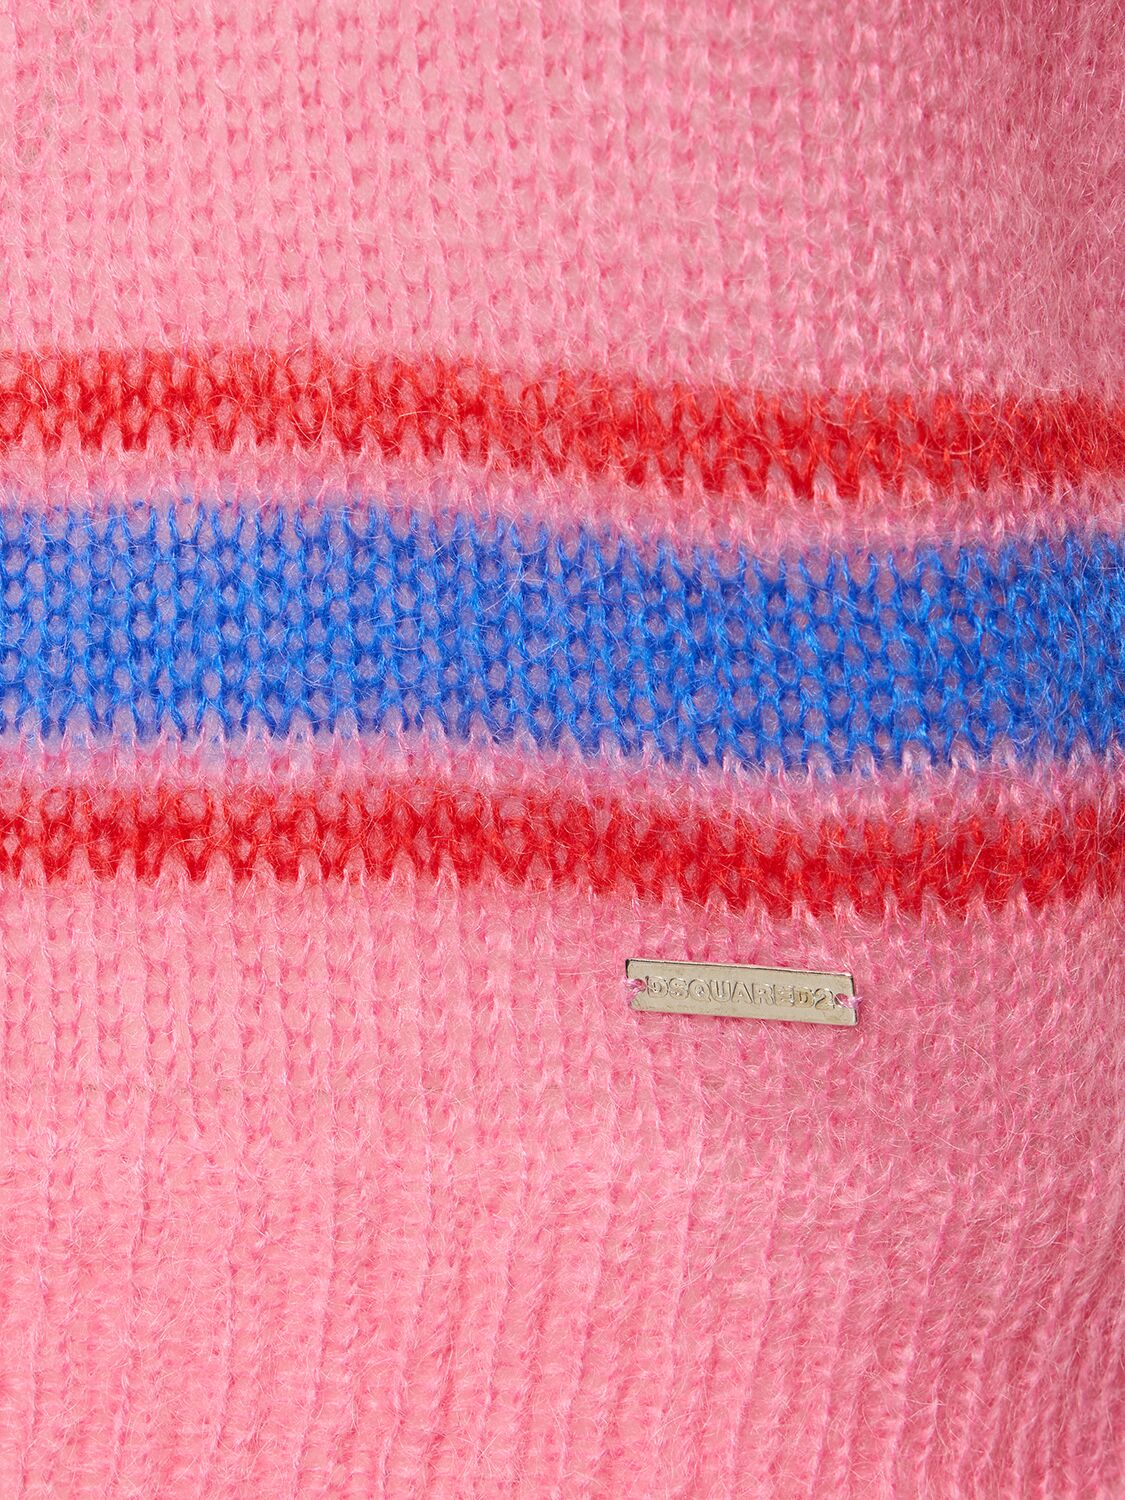 Shop Dsquared2 Striped Mohair Blend Knit Polo In Pink,blue,red